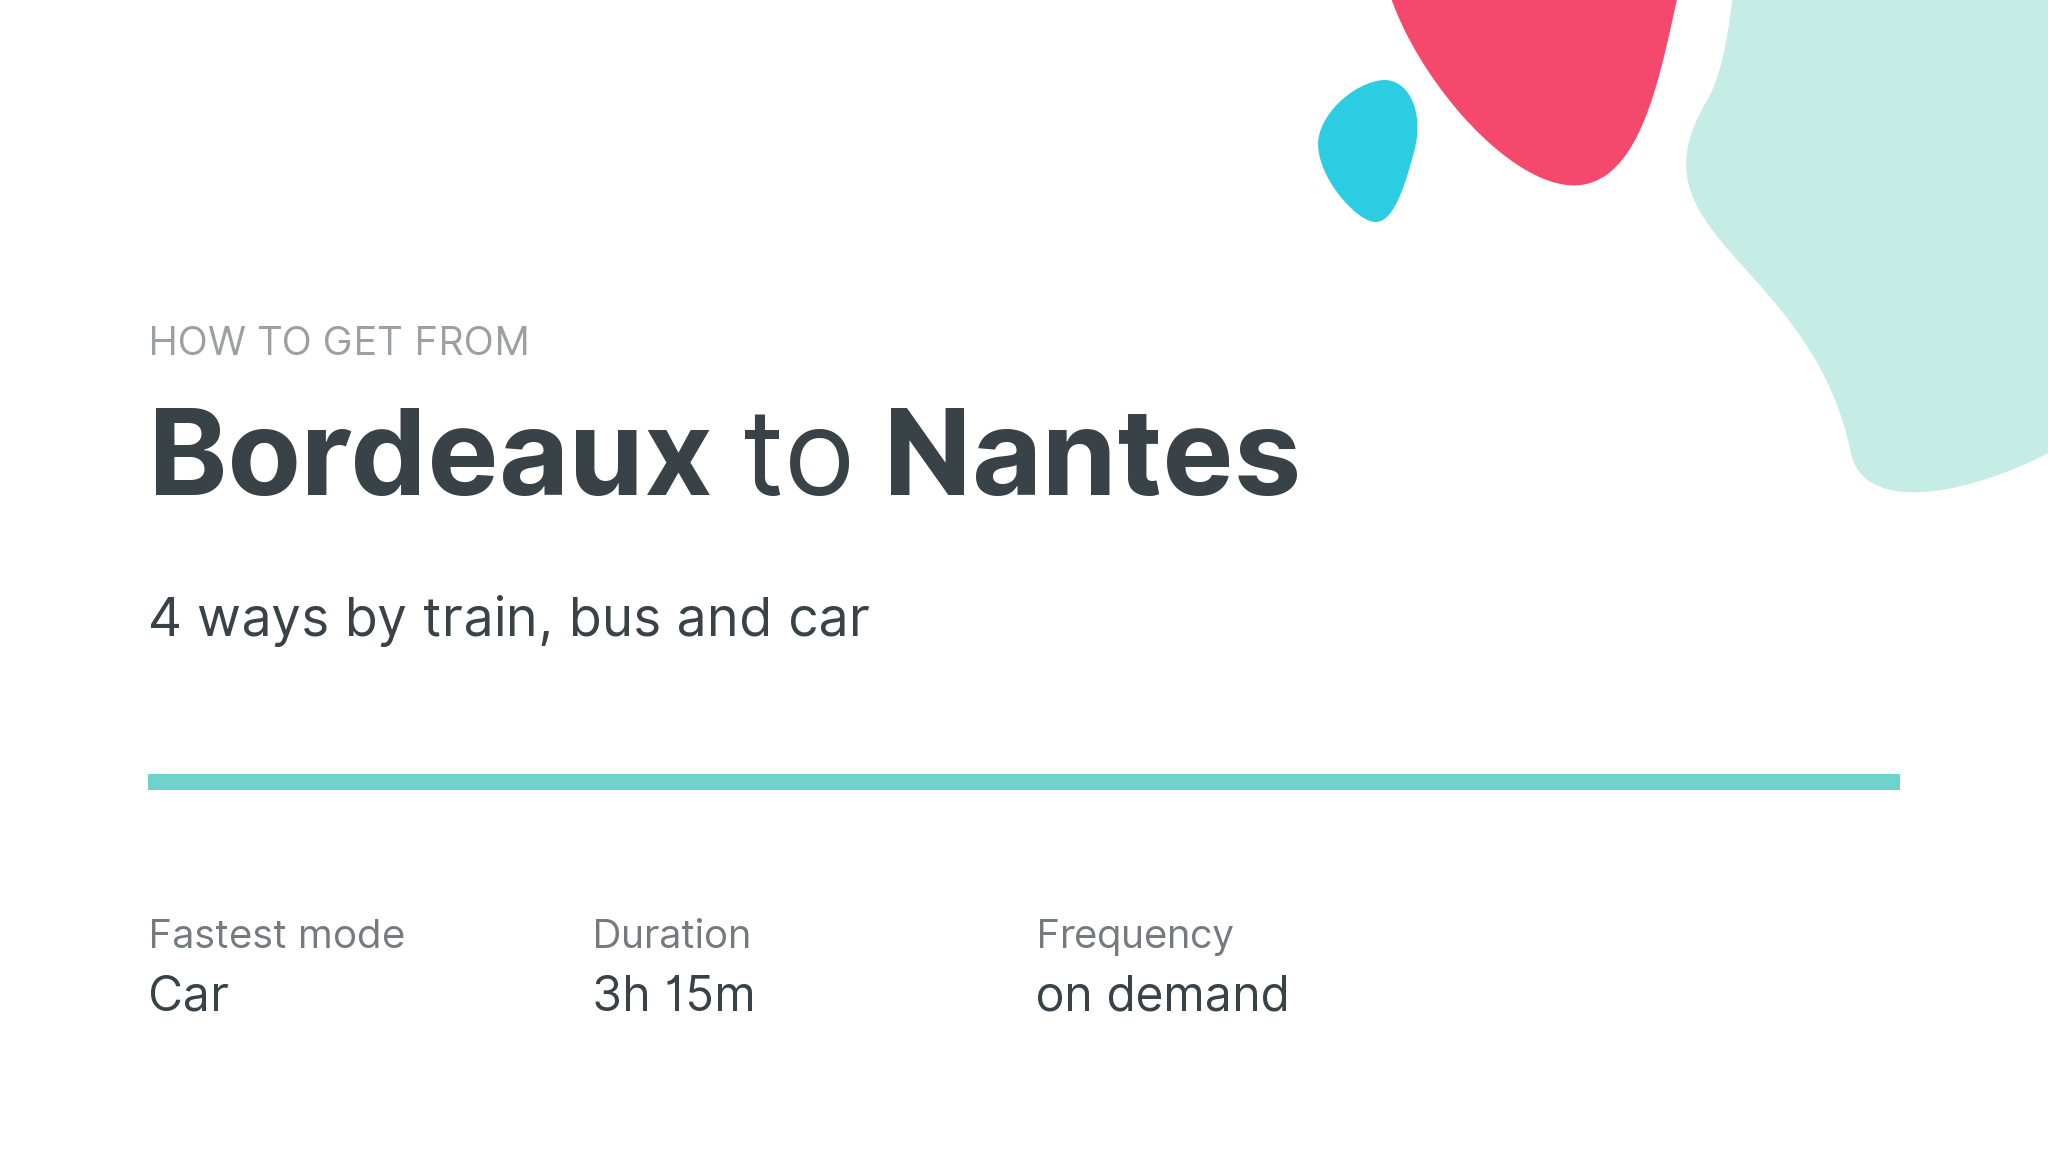 How do I get from Bordeaux to Nantes